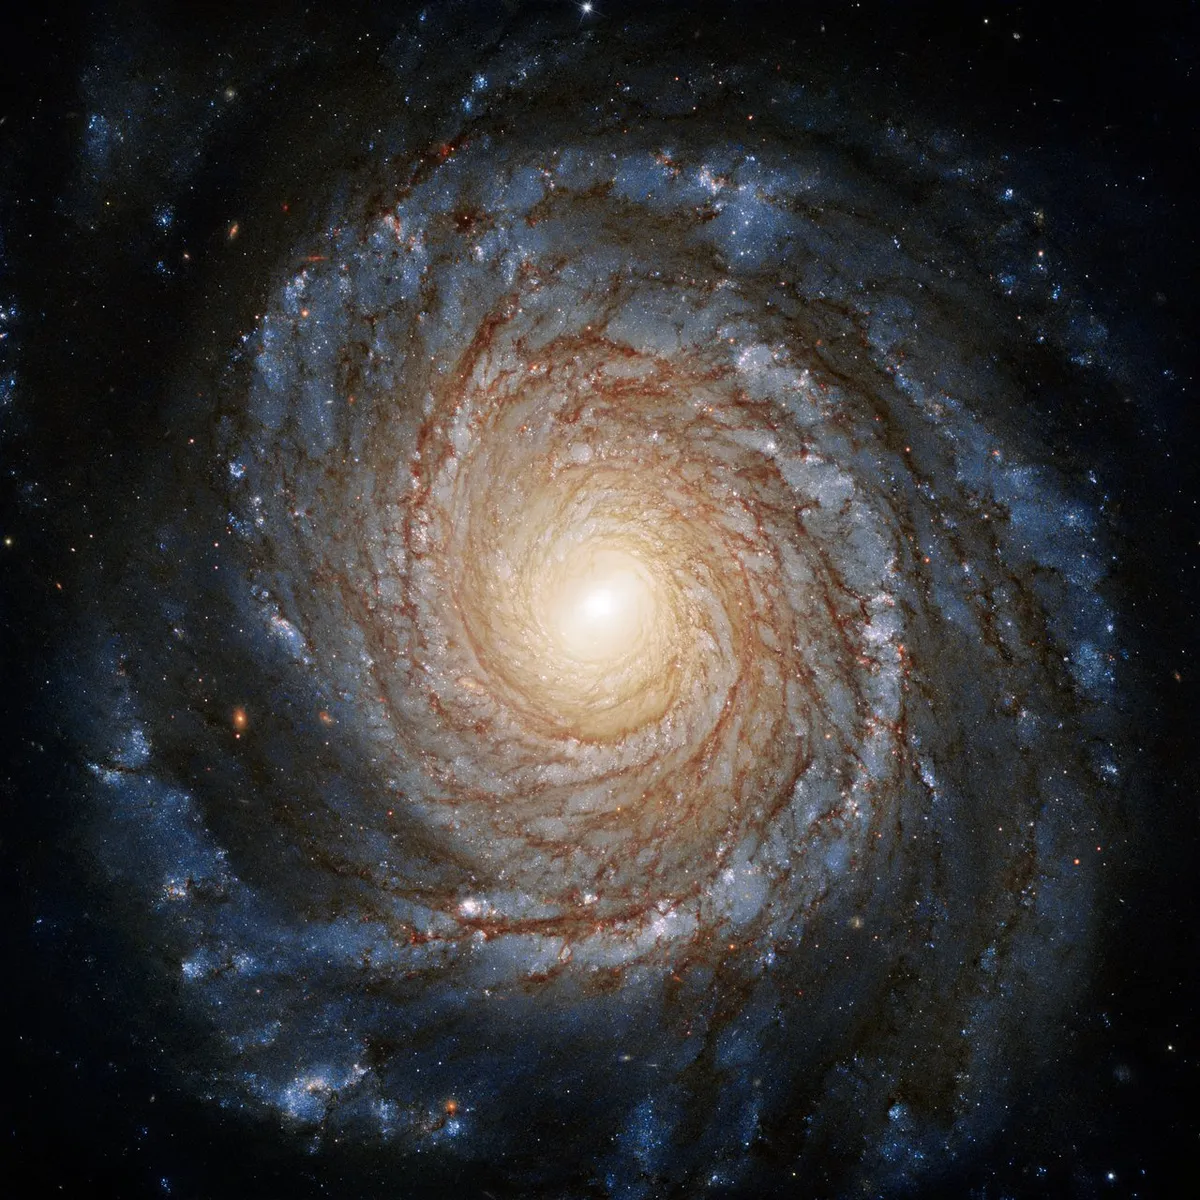 Galaxy NGC 3147 is roughly 130 million lightyears away, meaning we are observing the galaxy as it appeared 130 million years ago, because its light takes time to reach us. Credit: ESA/Hubble & NASA, A. Riess et al.